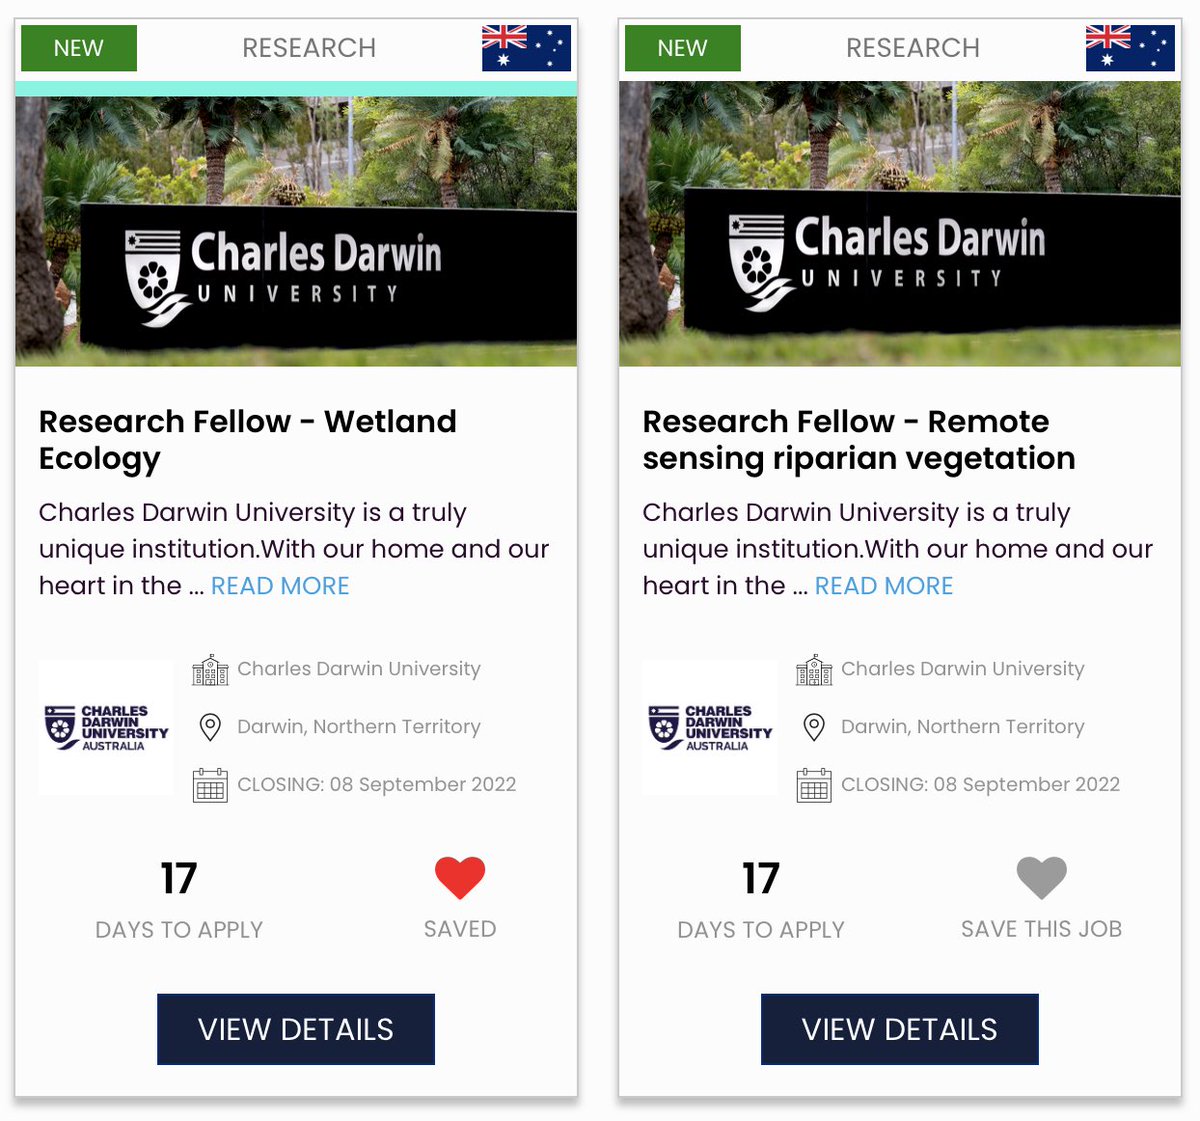 Postdoctoral research fellow jobs in ecology at Charles Darwin University. Apply here:  campusradarjobs.com  
#postdoc #ecology #ecologyjob #charlesdarwinuniversity #postdoctoral #wetlands #HigherEducationJobs #campusradarjobs #AcademicChatter #AcademicTwitter